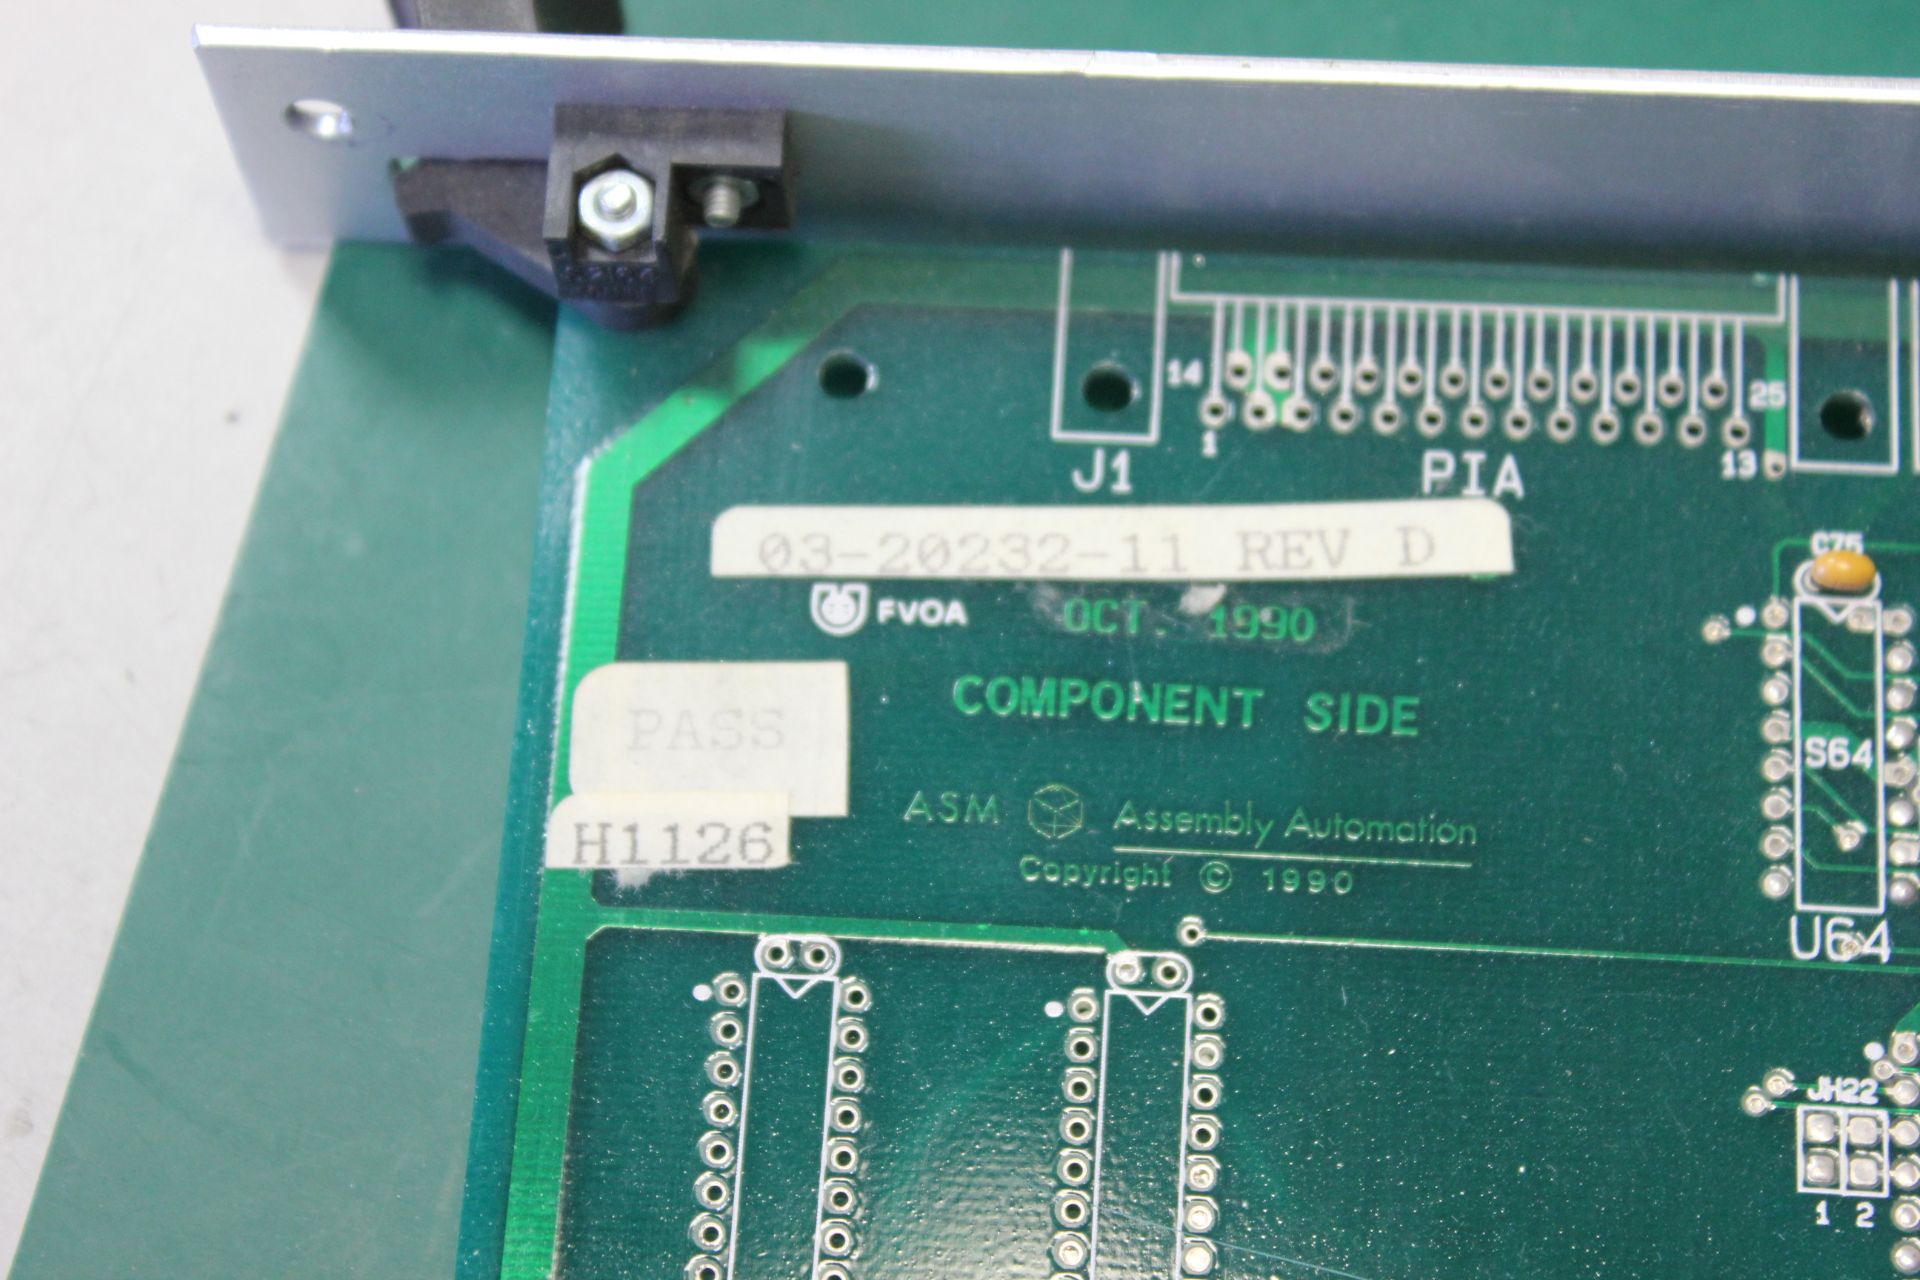 ASSEMBLY AUTOMATION ASM PR CPU BOARD - Image 4 of 5